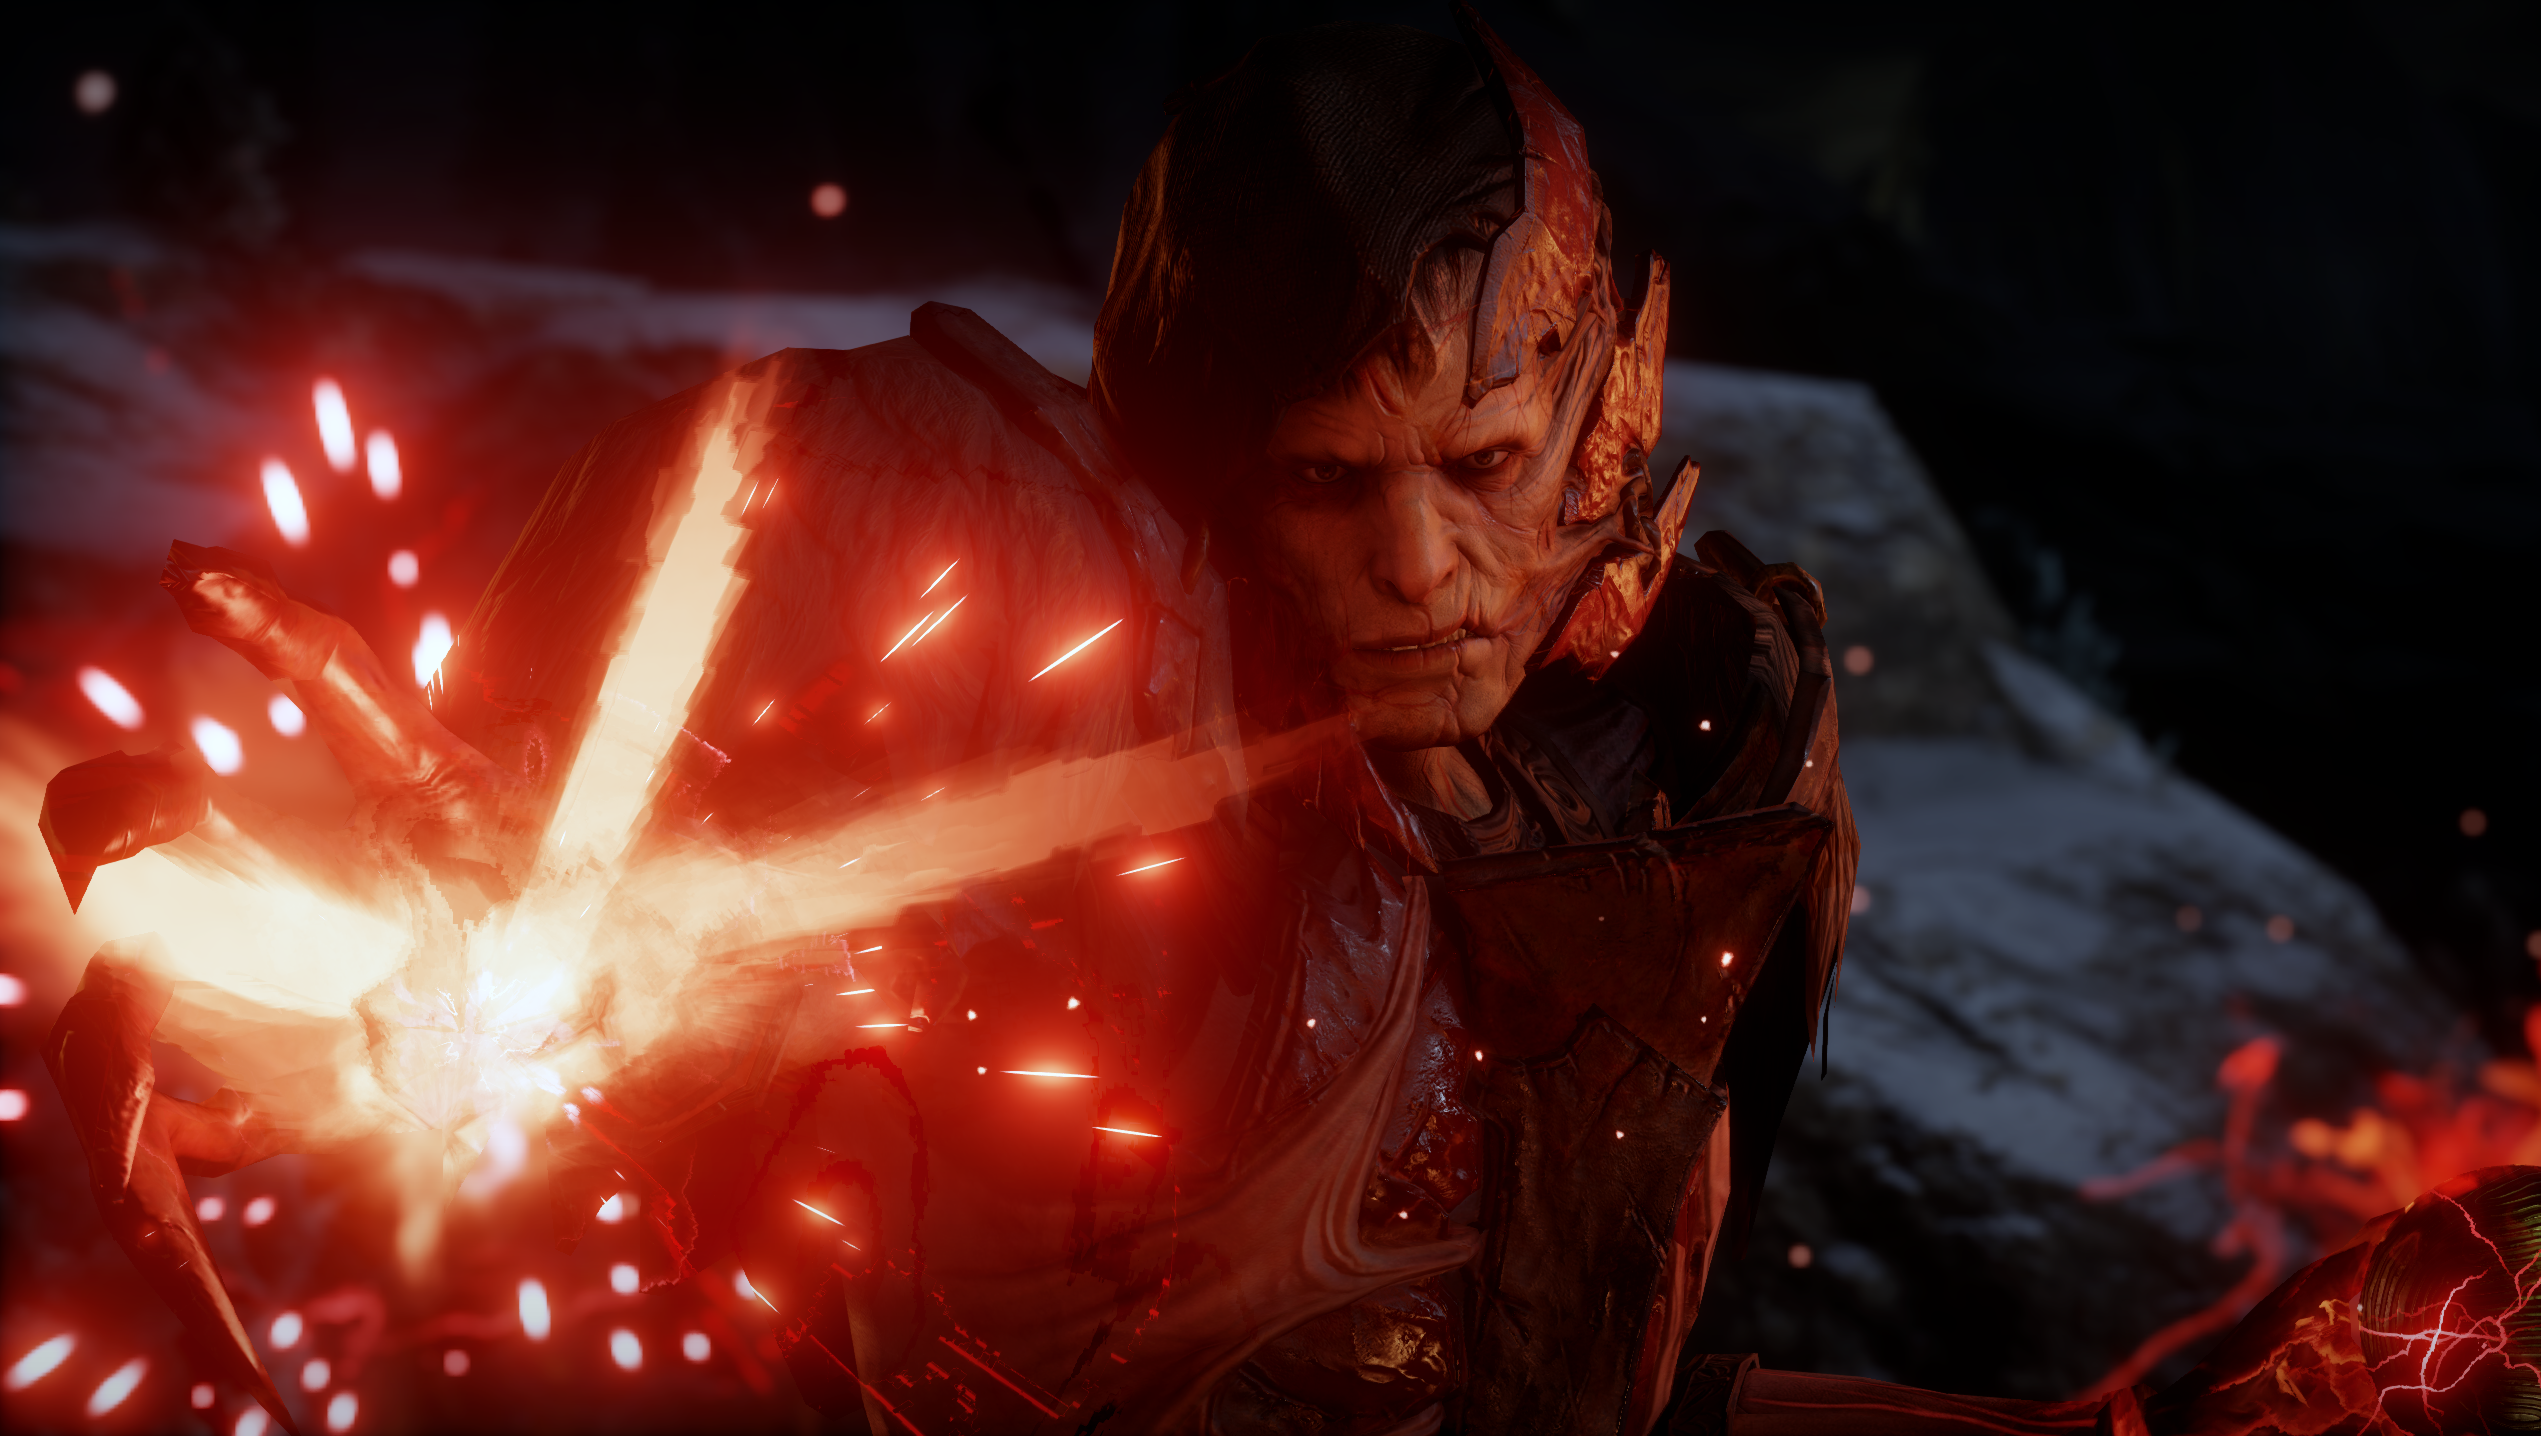 Dragon Age Inquisition Dragon Age Corypheus Fire Red Orange Bad Guys Video Games PC Gaming 2541x1436